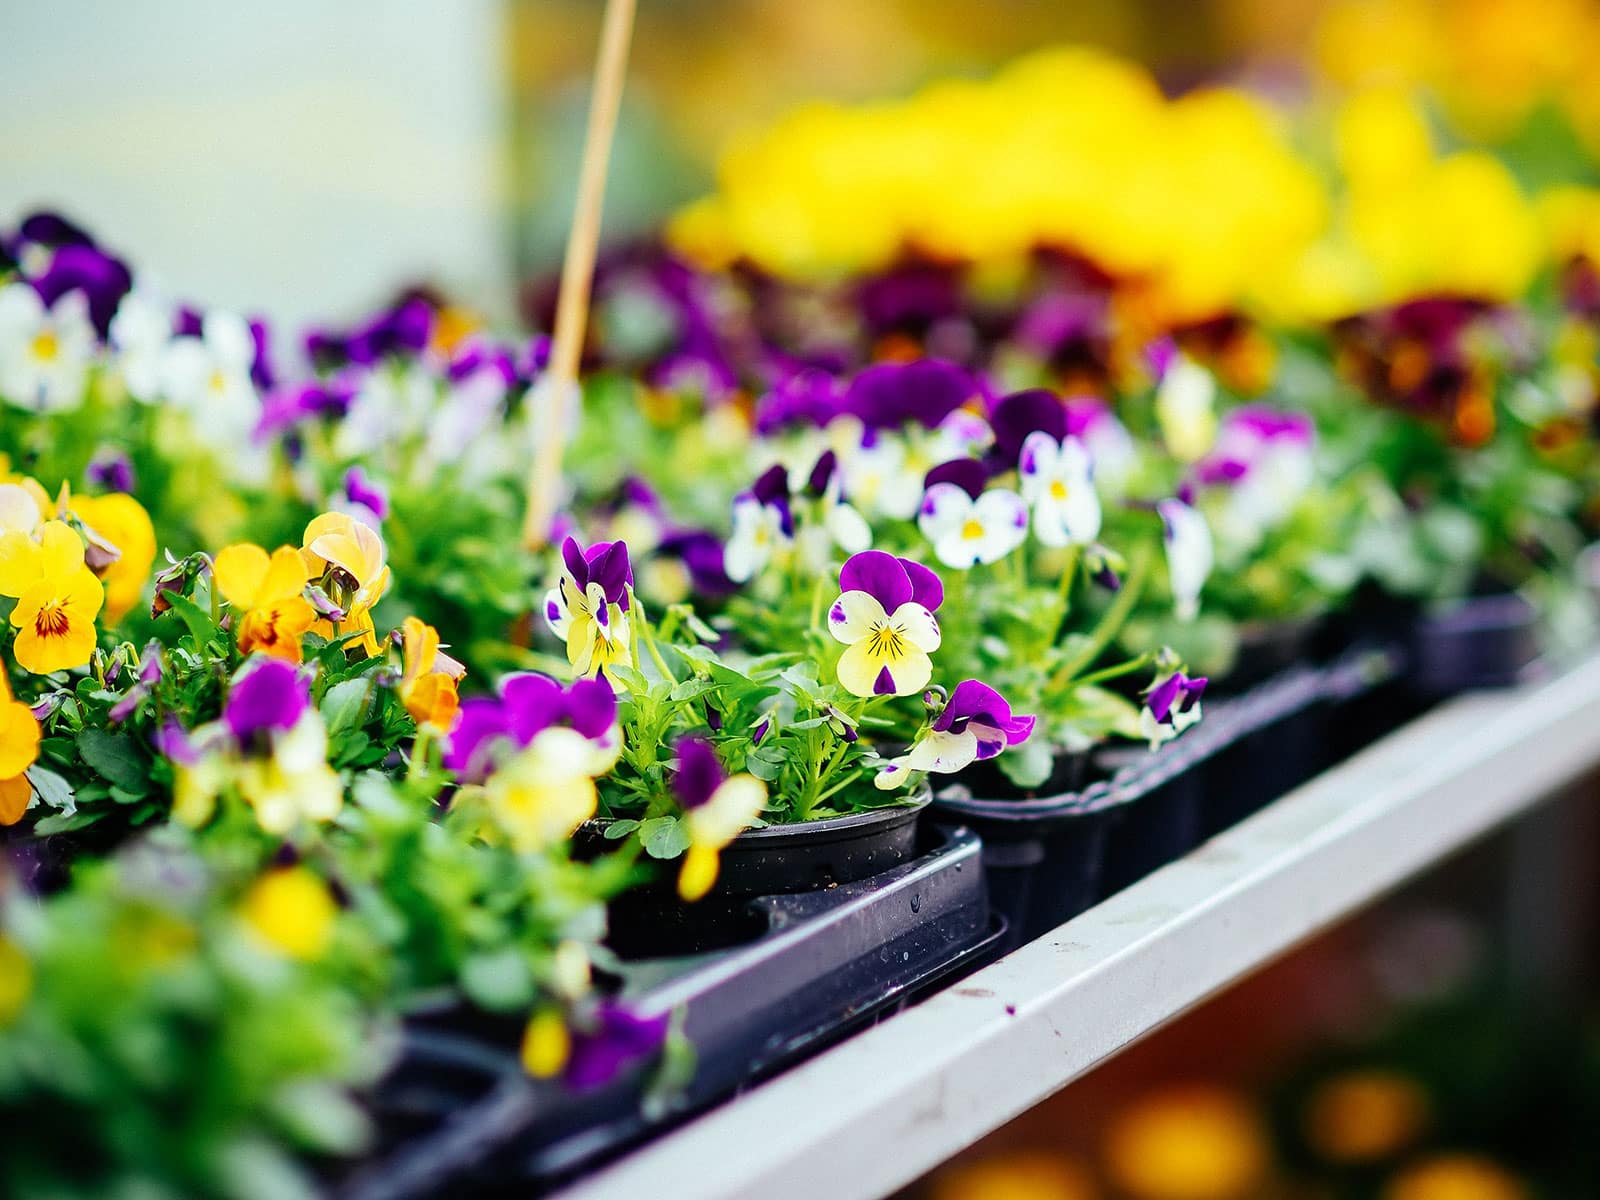 Black plastic nursery trays full of potted pansies at a garden center